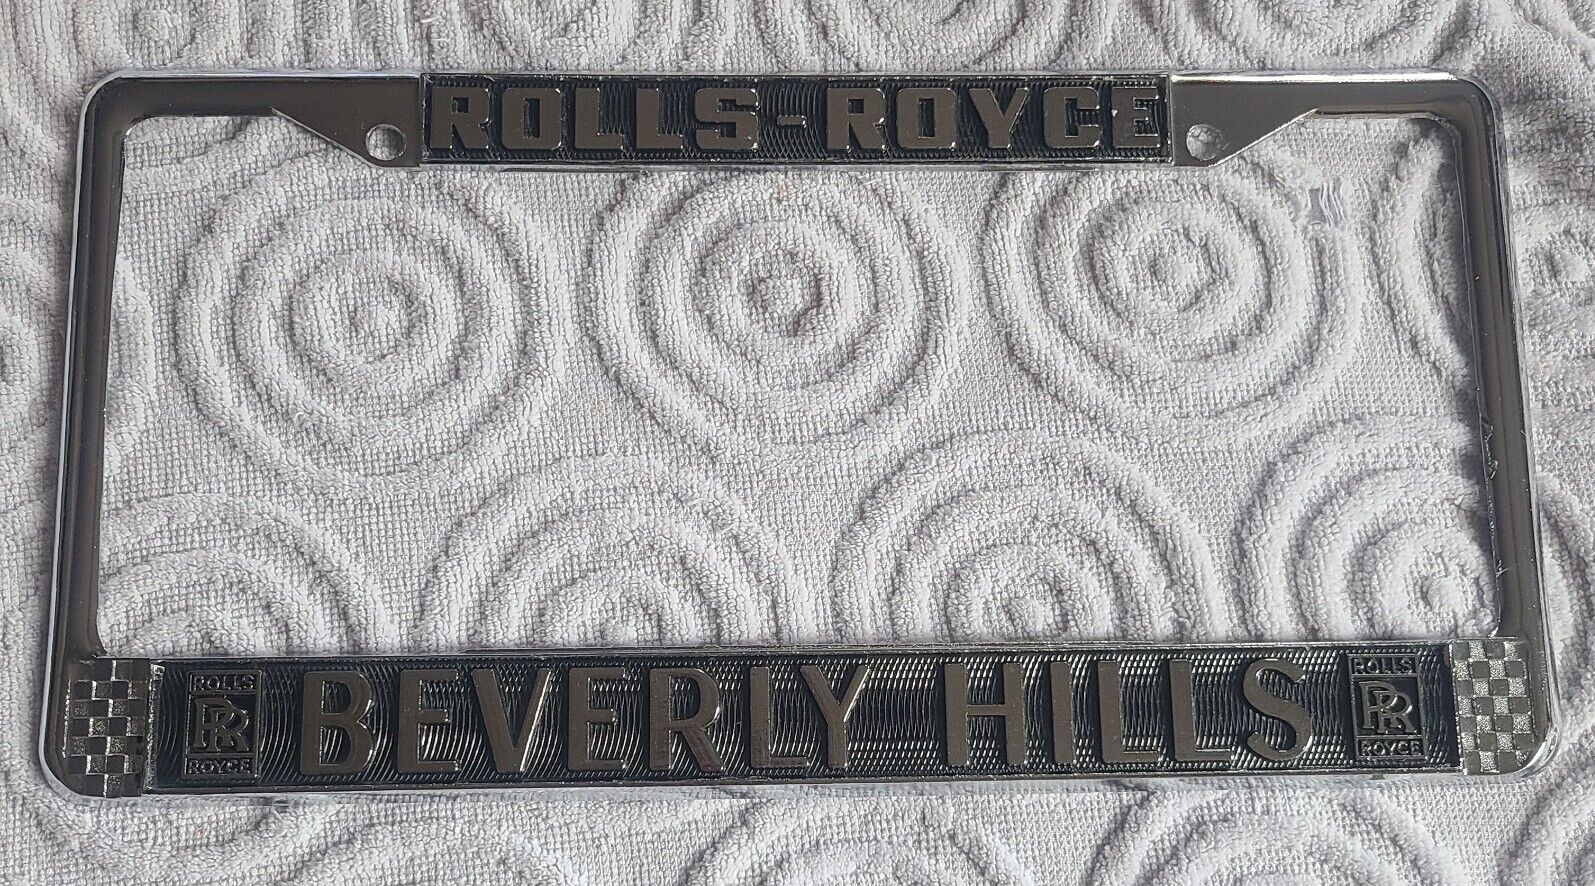 Rare Rolls Royce Beverly Hills Calif License Plate Frame Silver Shadow Ghost RR